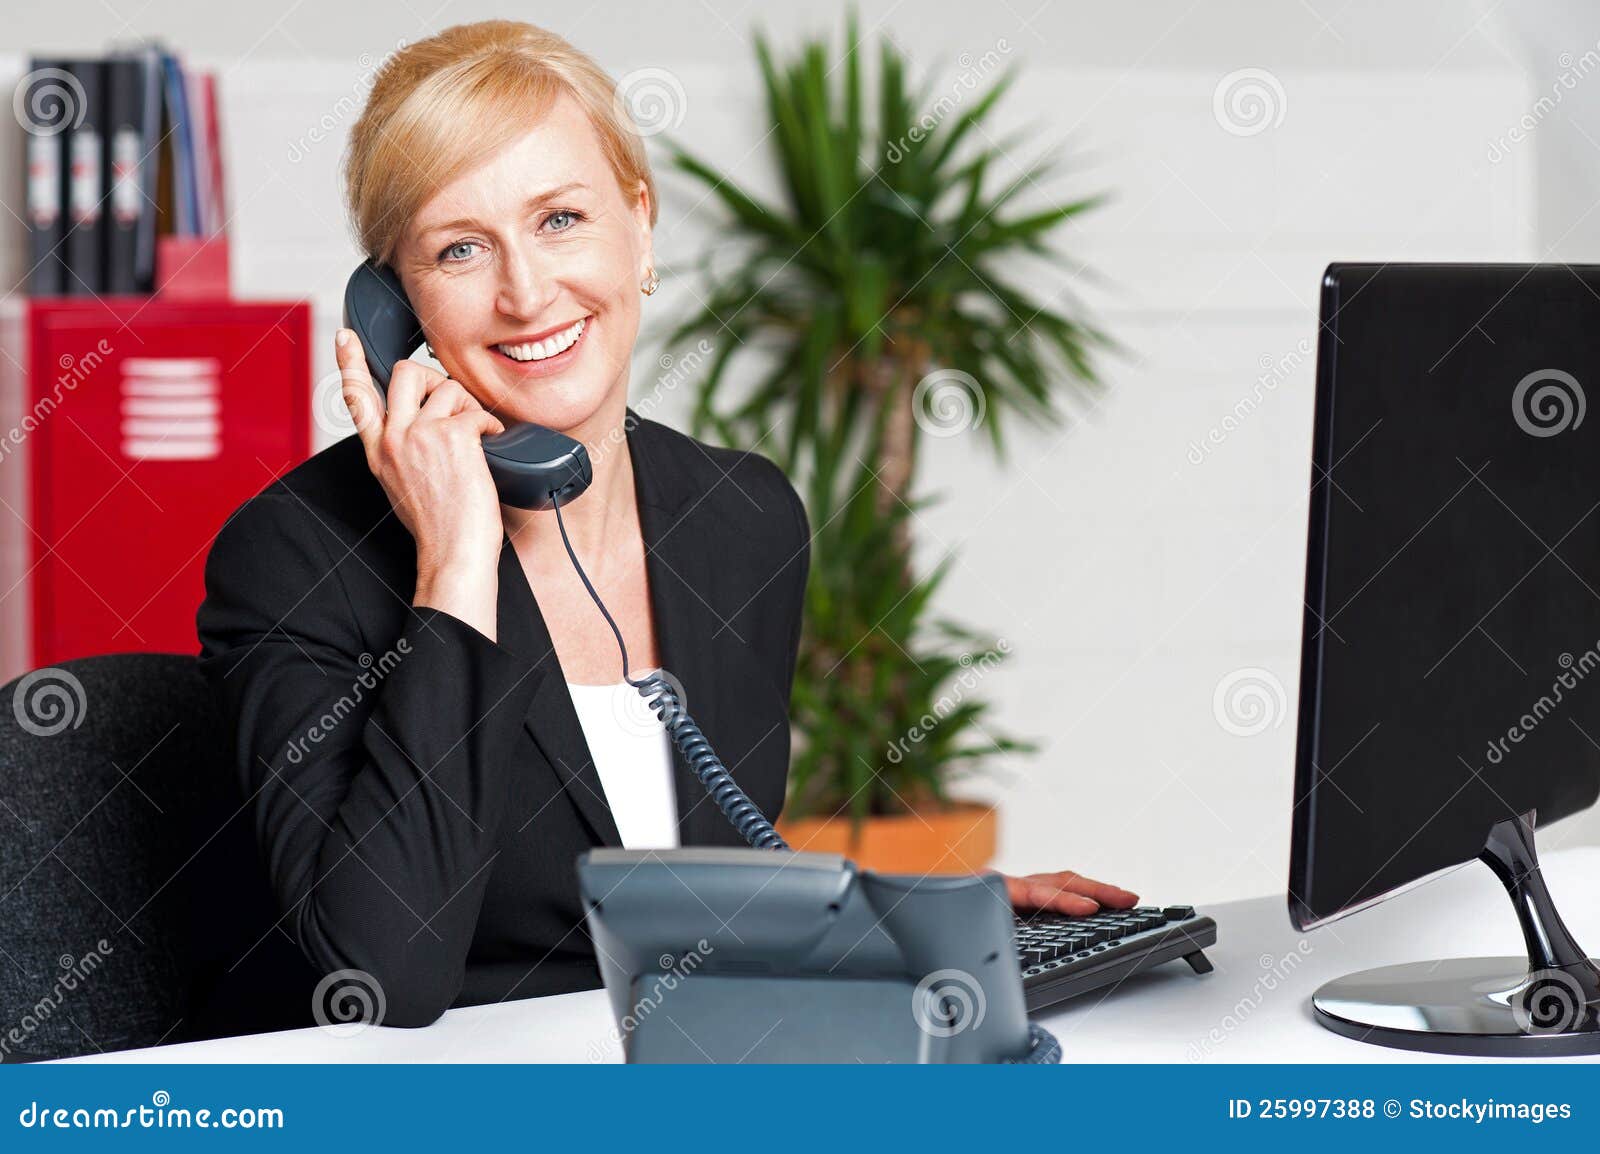 secretary talking on phone with client